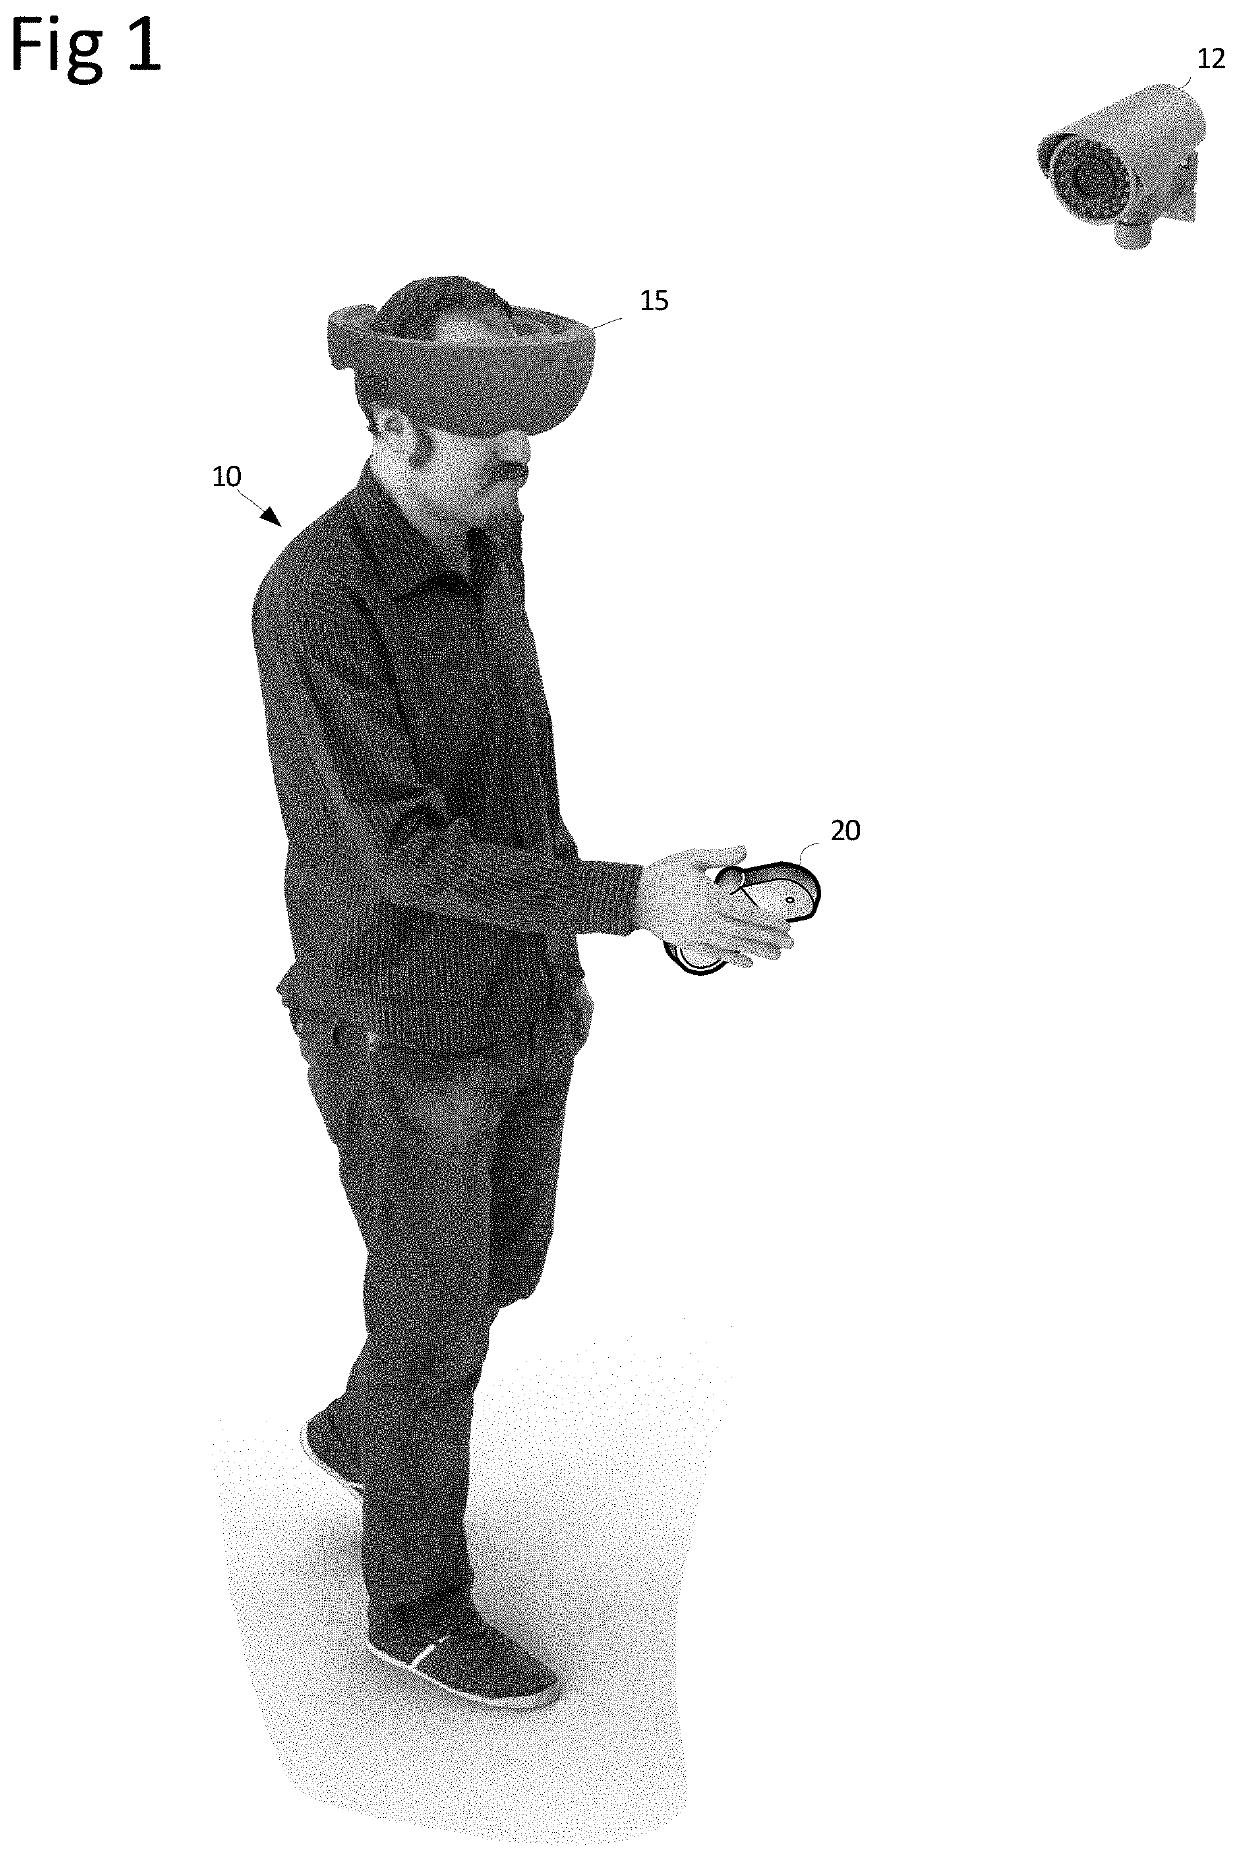 Relative pose data augmentation of tracked devices in virtual environments